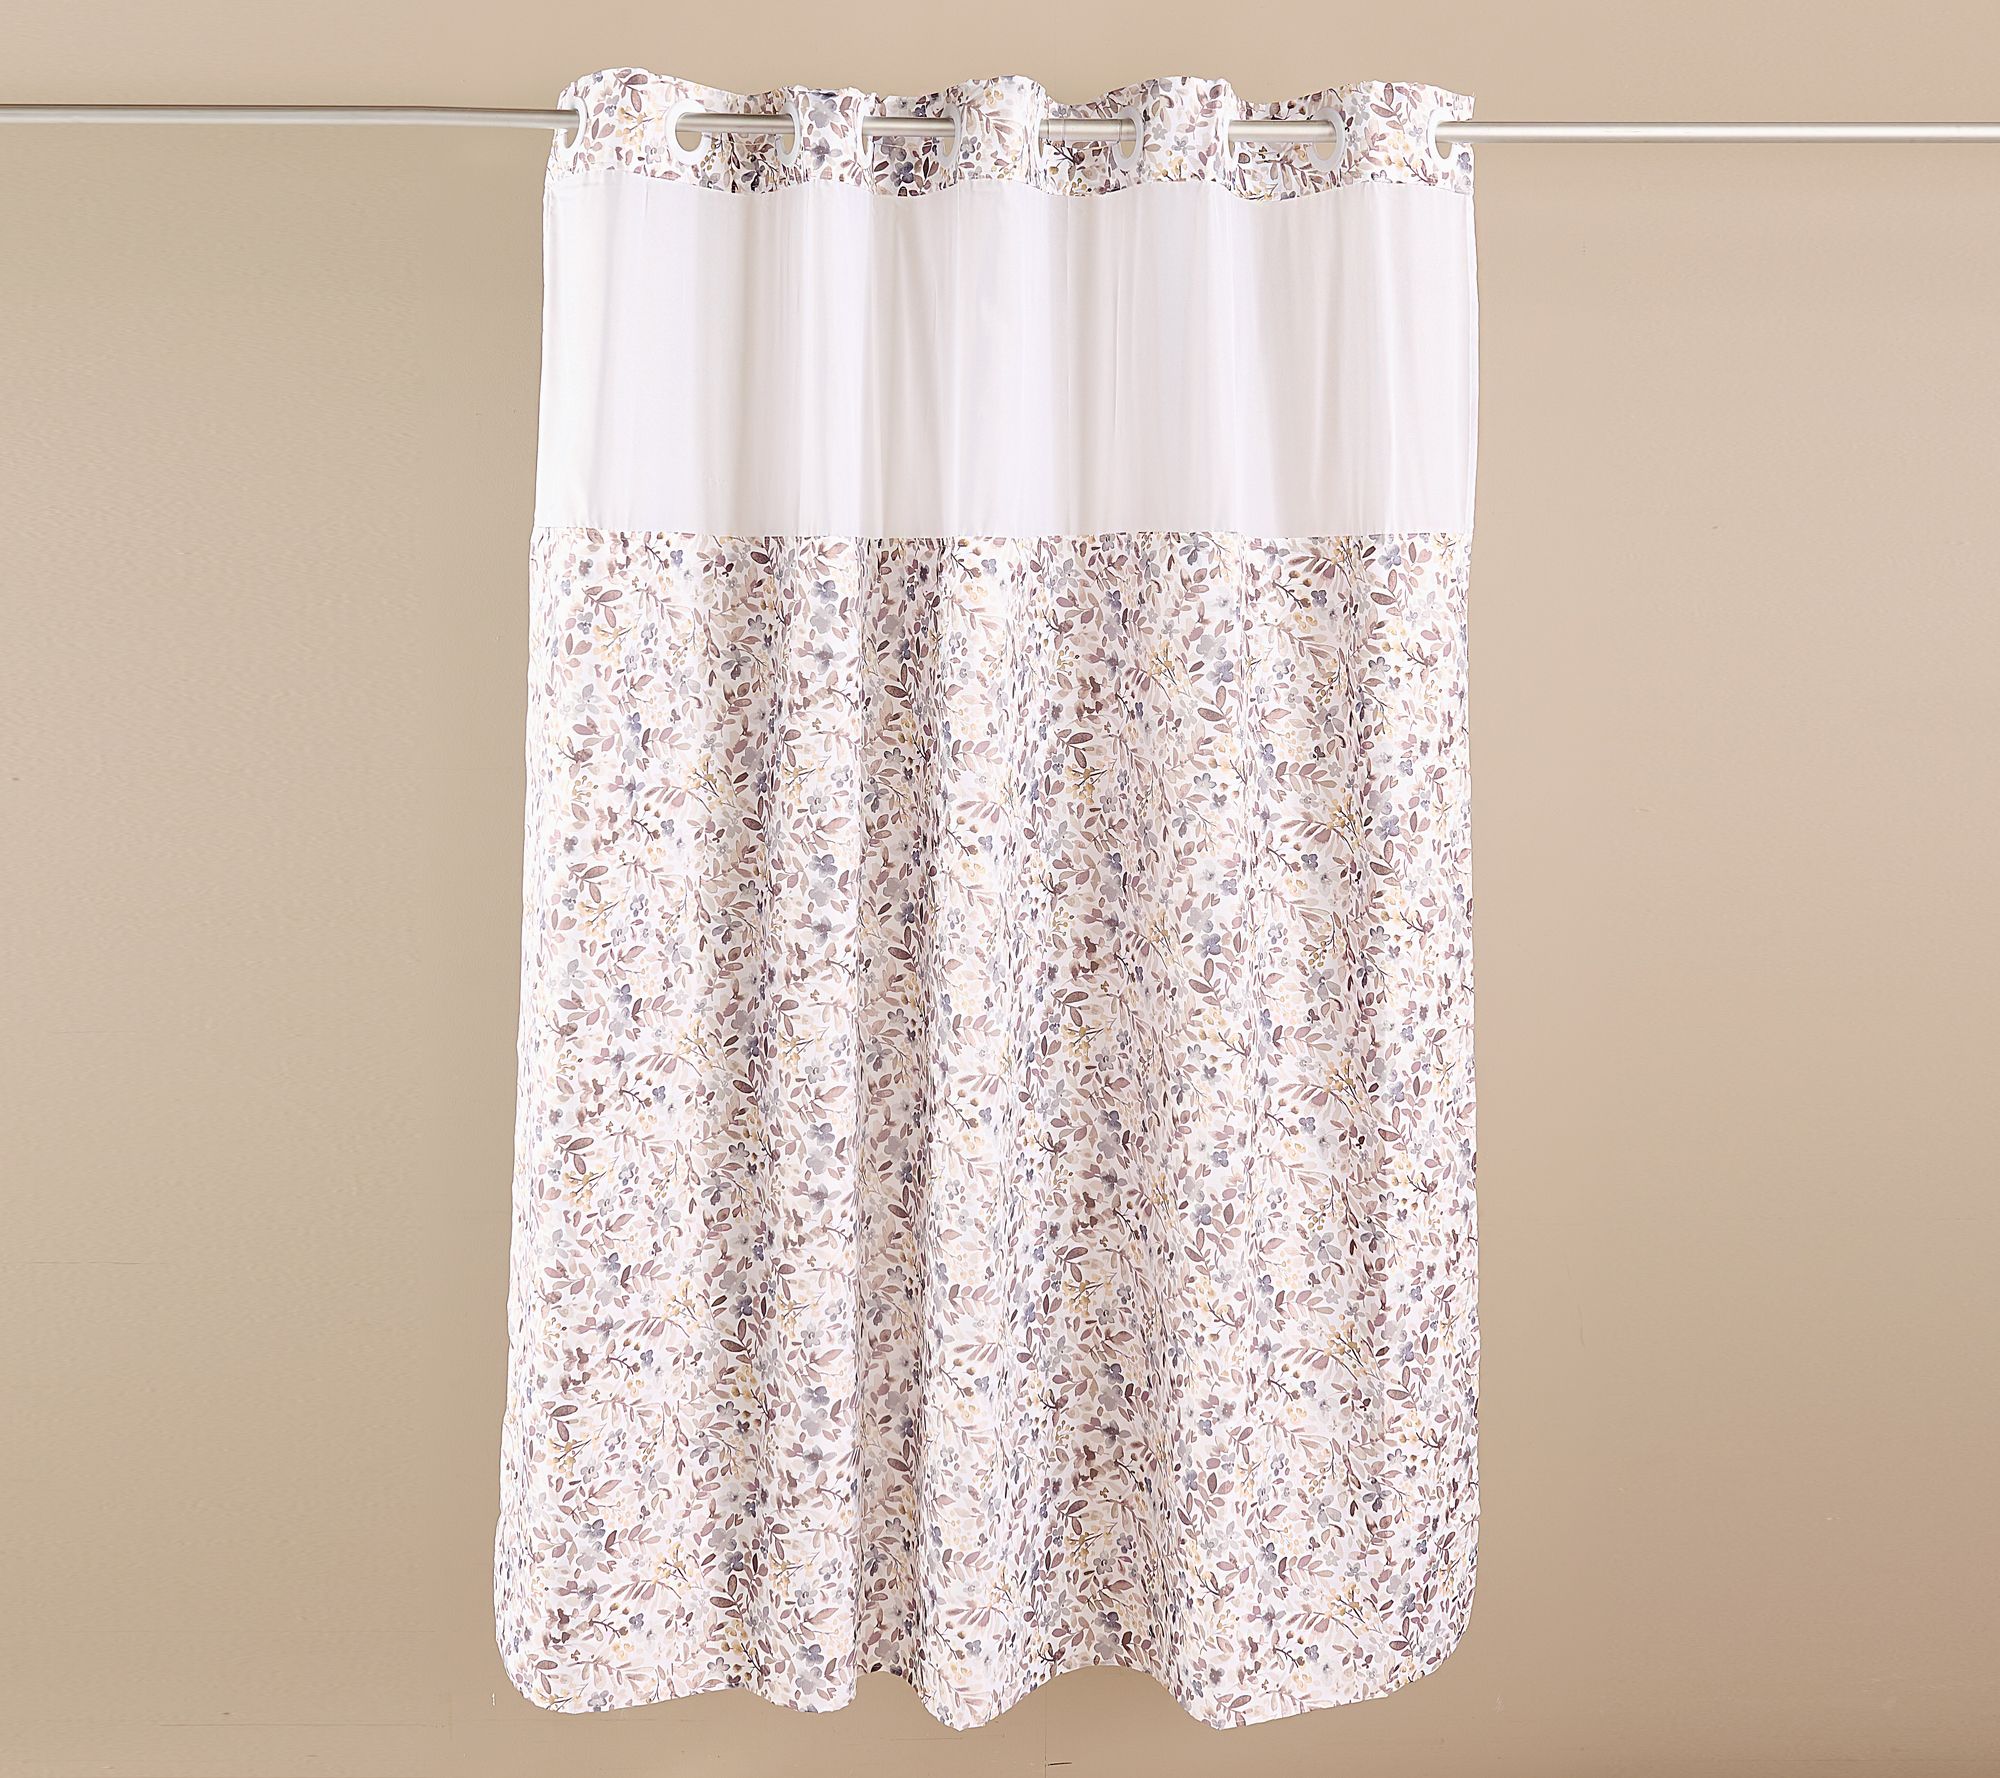 Stylish city shower curtains and more from Men's Society ~ Fresh